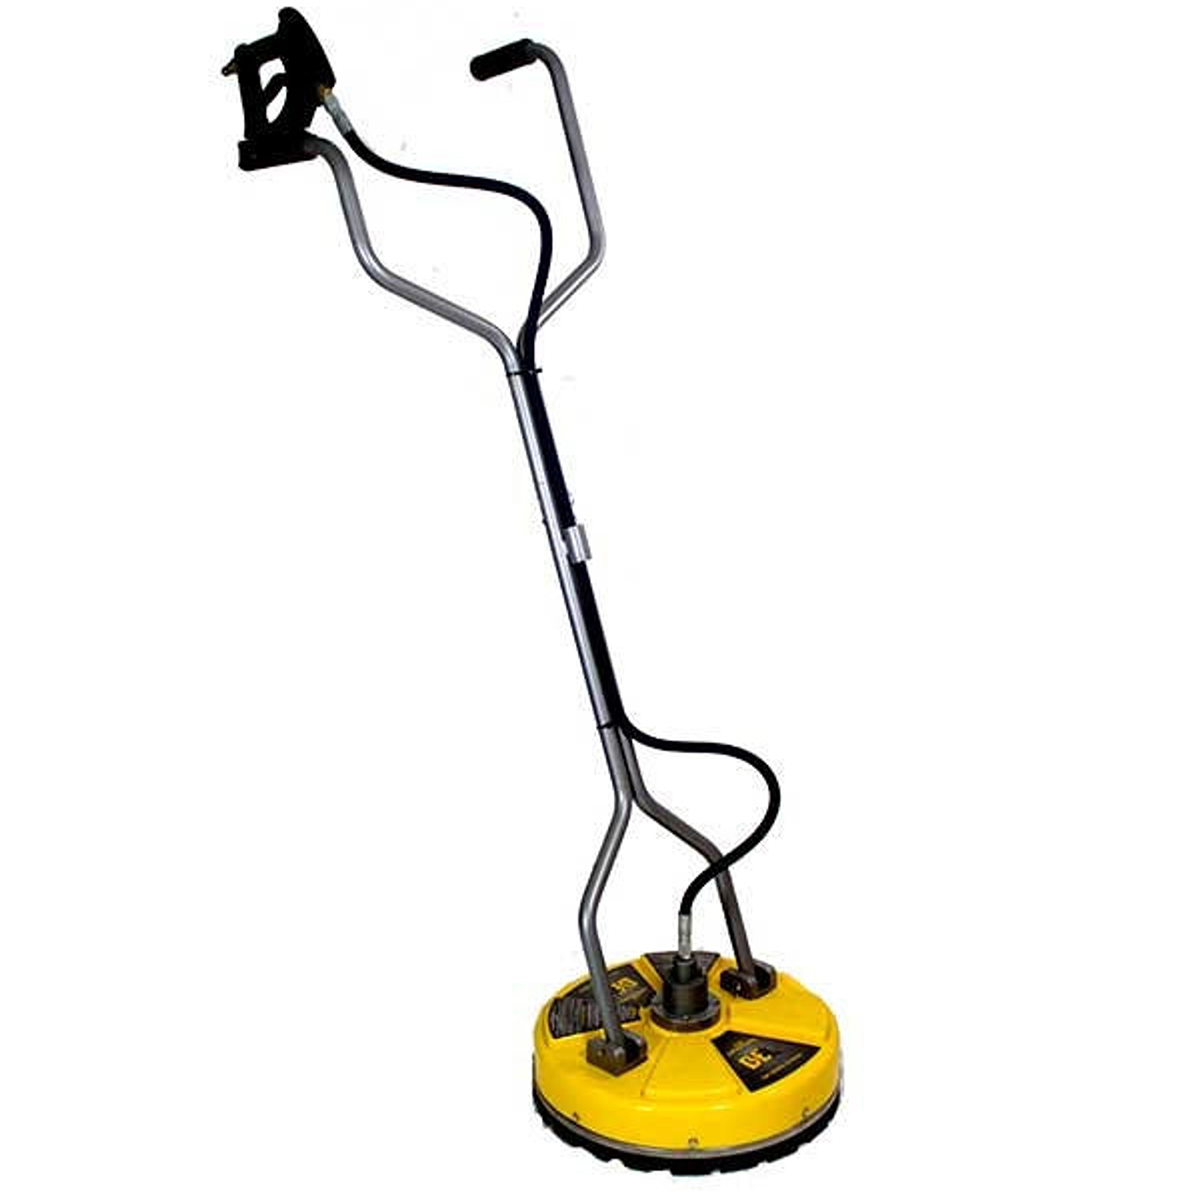 BE-Pressure-Whirlaway-16-inch-Rotary-Surface-Cleaner-85.403.003-angled